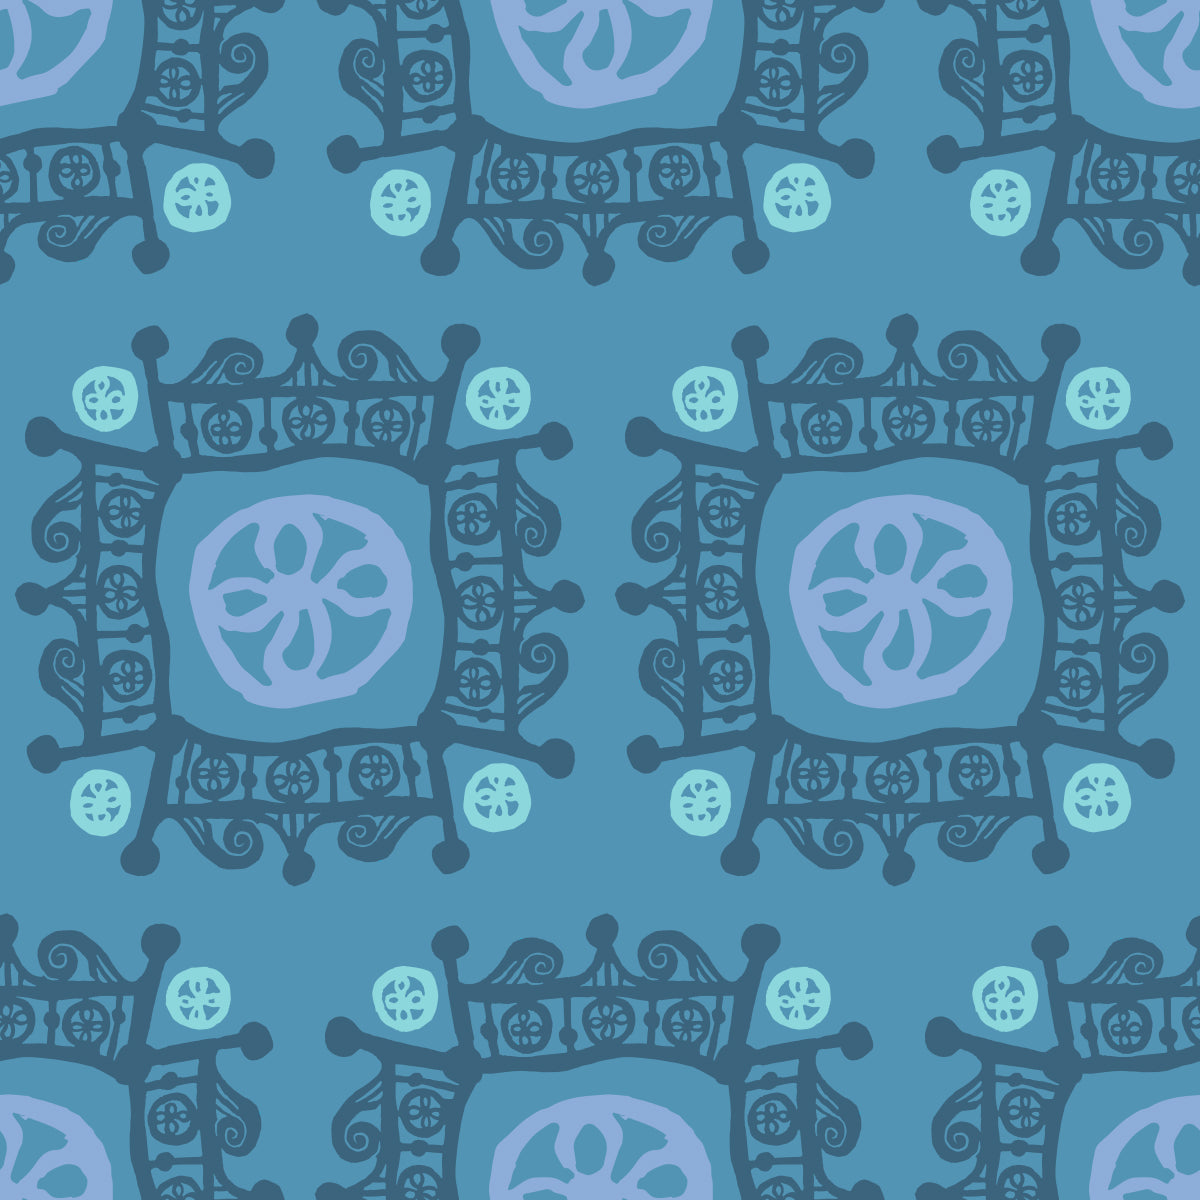 Rock on Royal Frost features a repeating pattern in muted green, dusty blue, lavender, and purple colors of hand-drawn flowers encased in ornate squares bordered by crown-like flourishes.